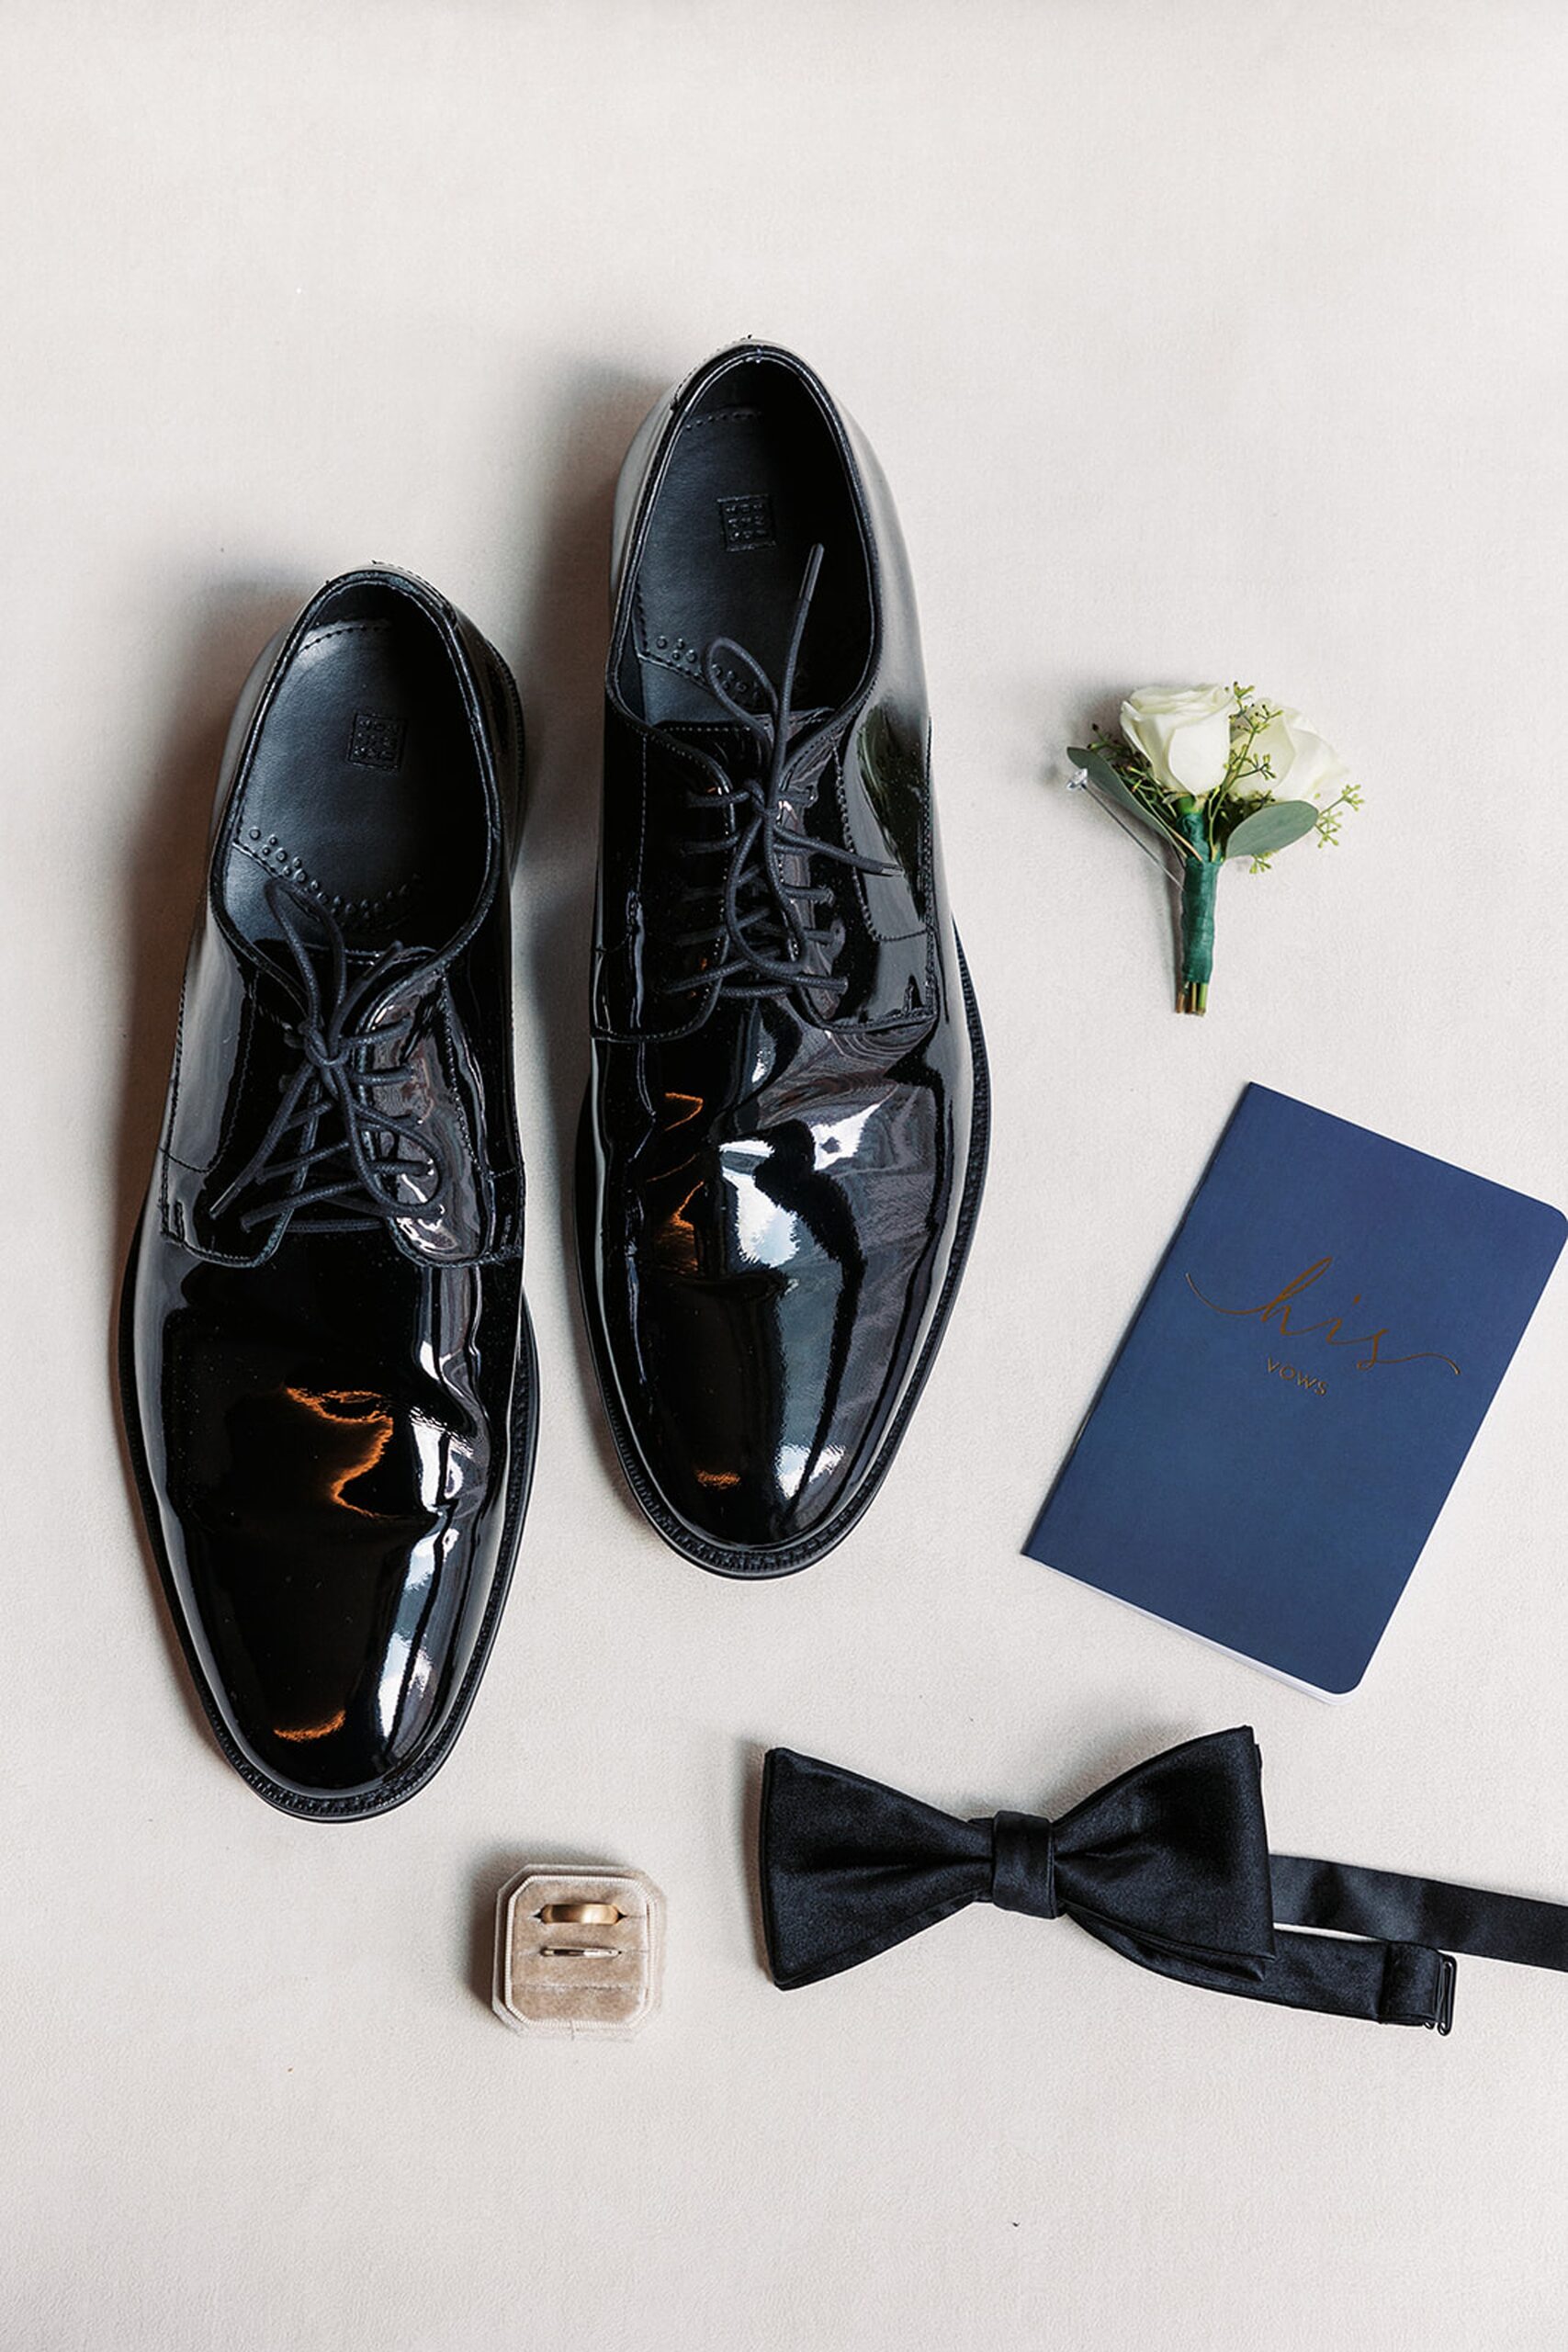 Details of a groom's shoes, rings, boutonniere and bowtie